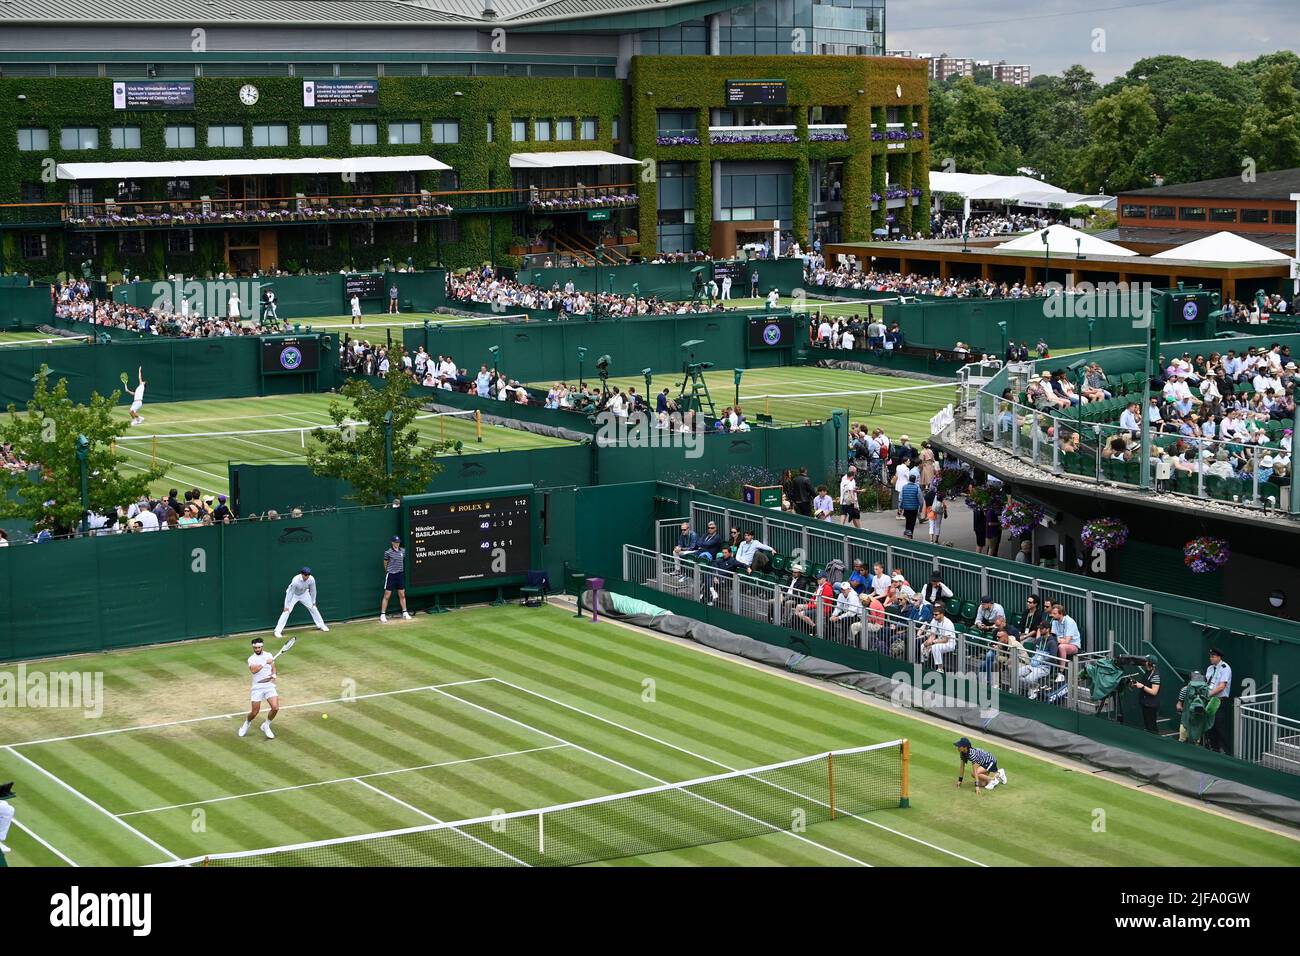 Tennis - Wimbledon - All England Lawn Tennis and Croquet Club, London, Britain - July 1, 2022 General view of the outer courts and Georgia's Nikoloz Basilashvili in action during his third round match against against Netherlands' Tim van Rijthoven REUTERS/Toby Melville Stock Photo